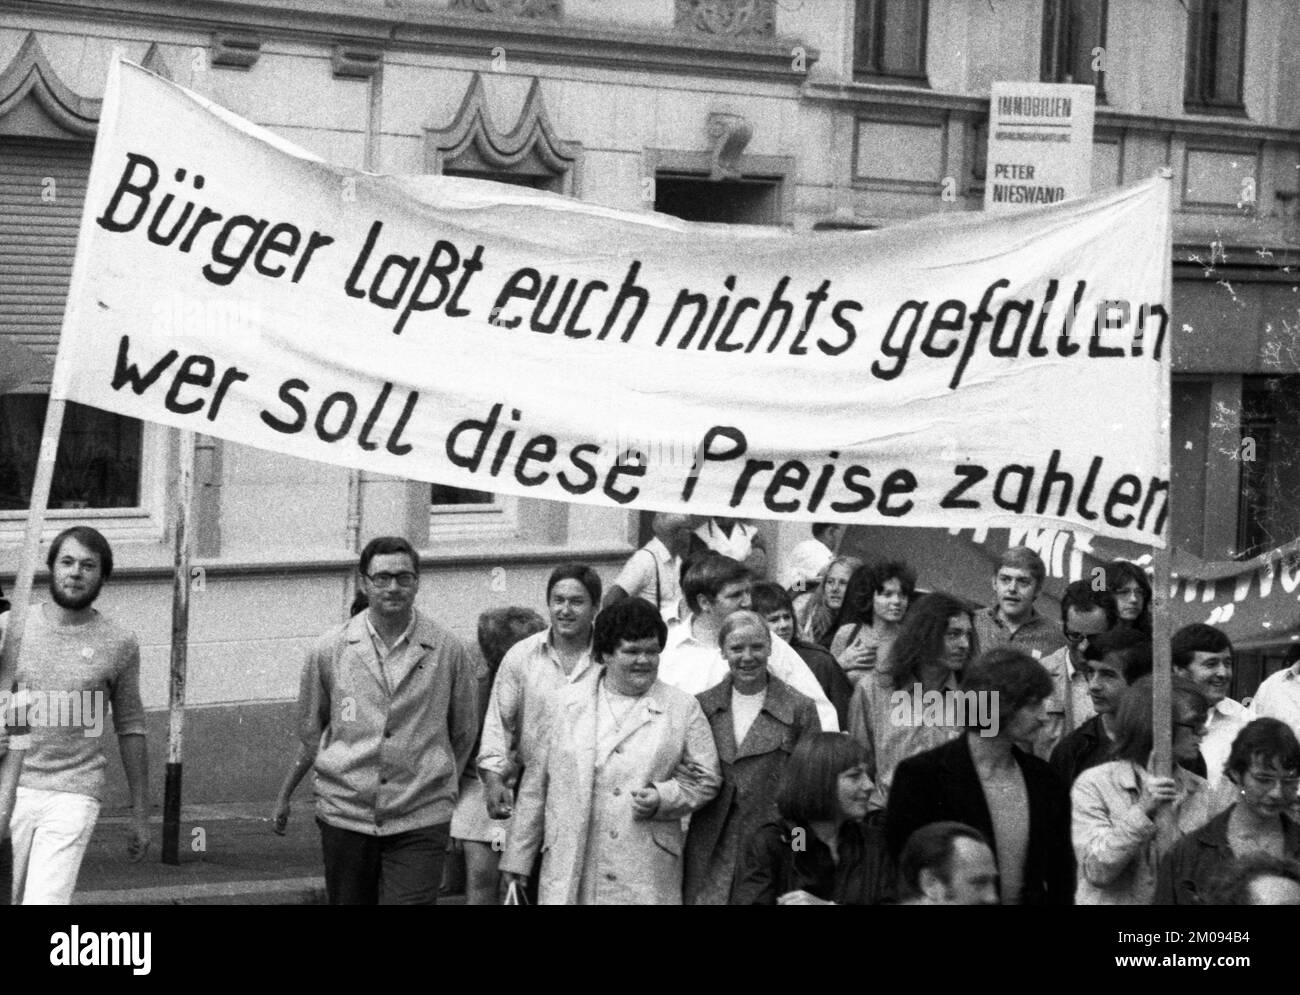 With a conference and demonstration, the German Communist Party (DKP) celebrated the 100th birthday of Karl Liebknecht in Solingen on 21.8.1971, Germa Stock Photo